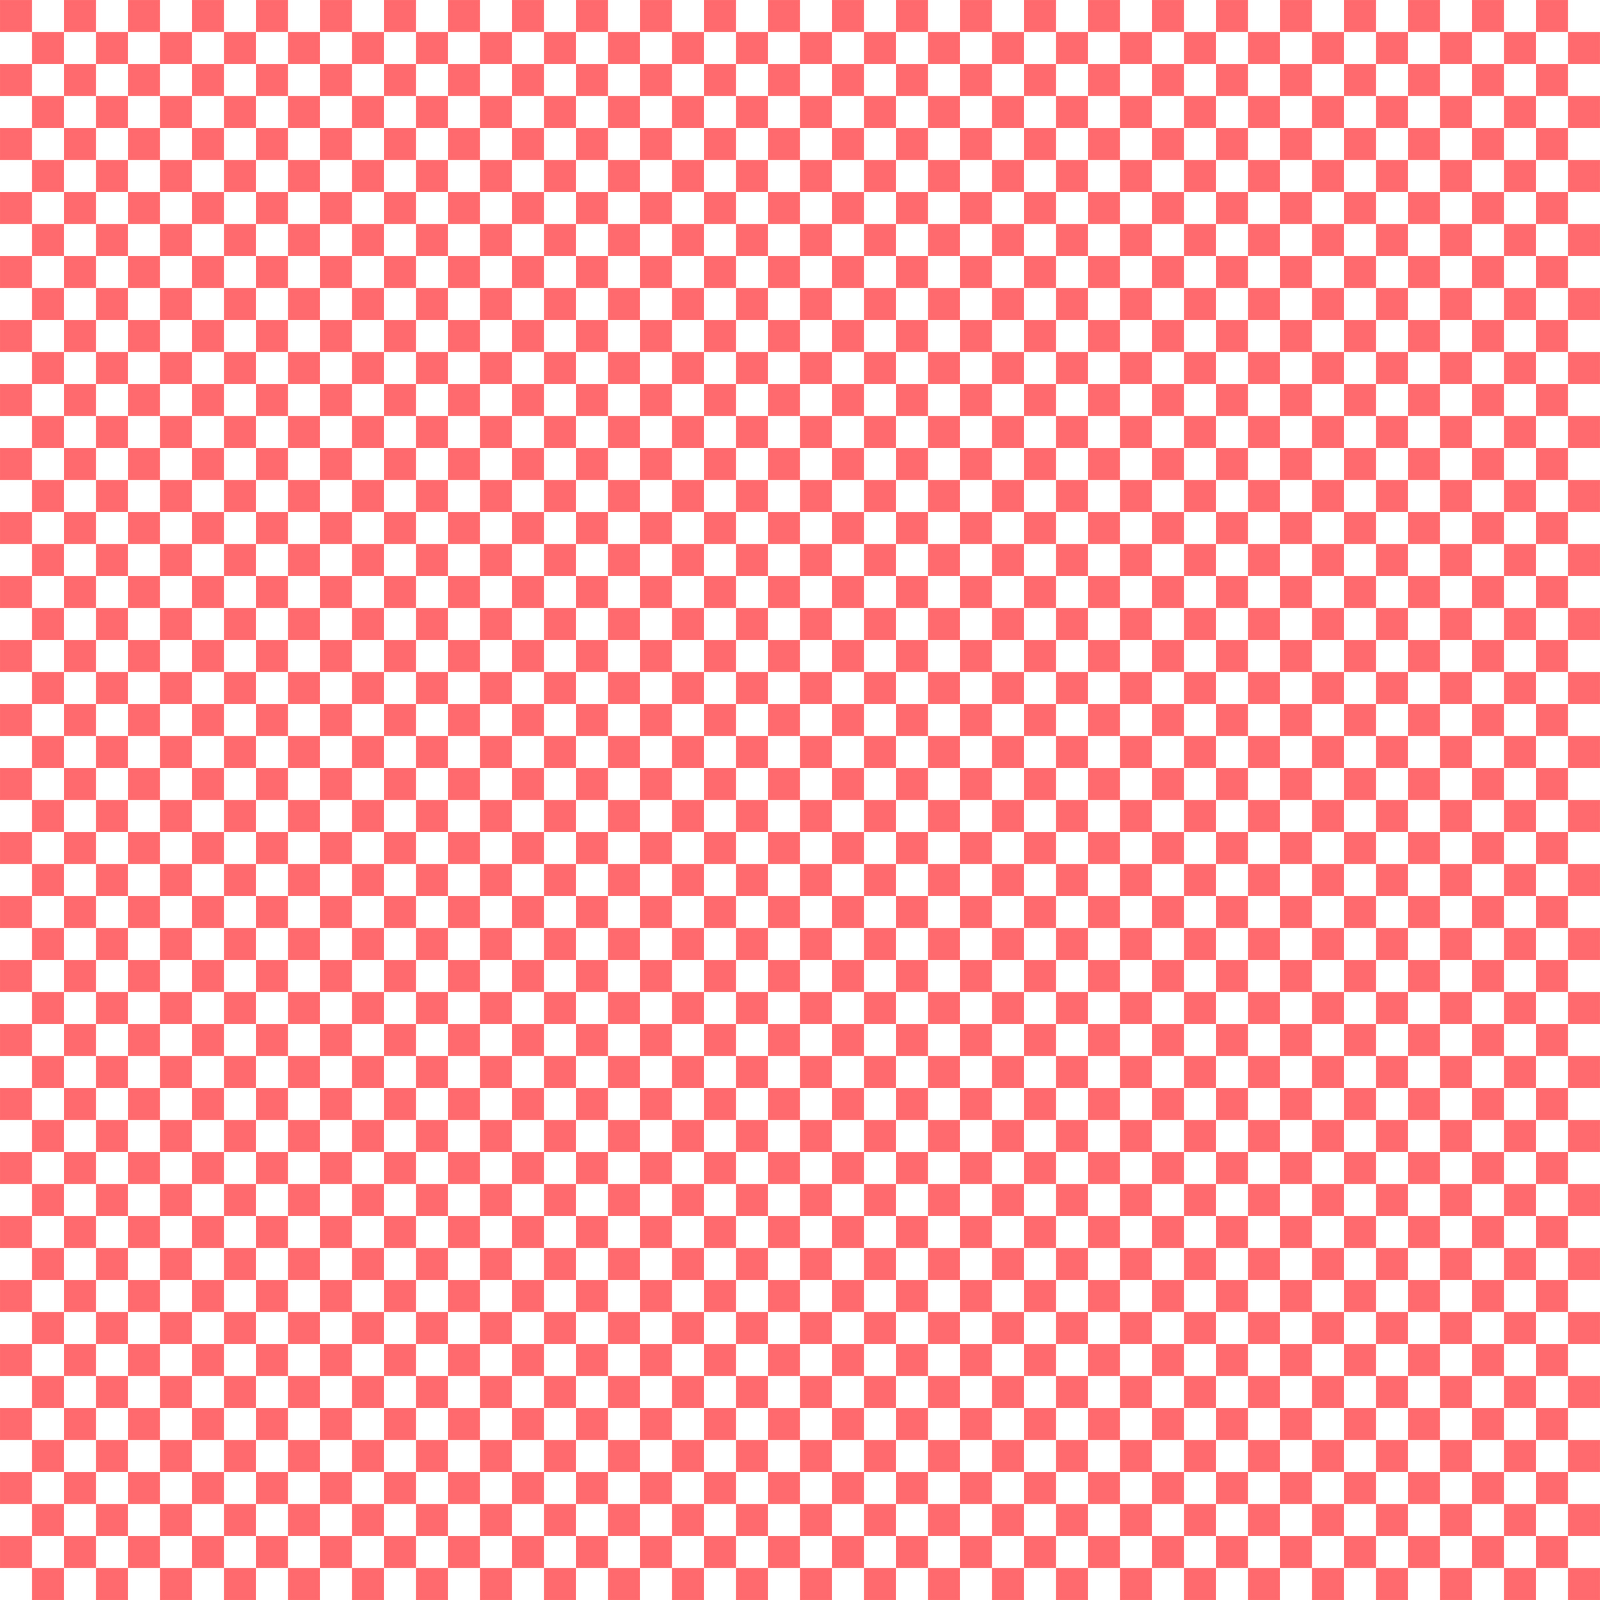 red and white checkerboard pattern